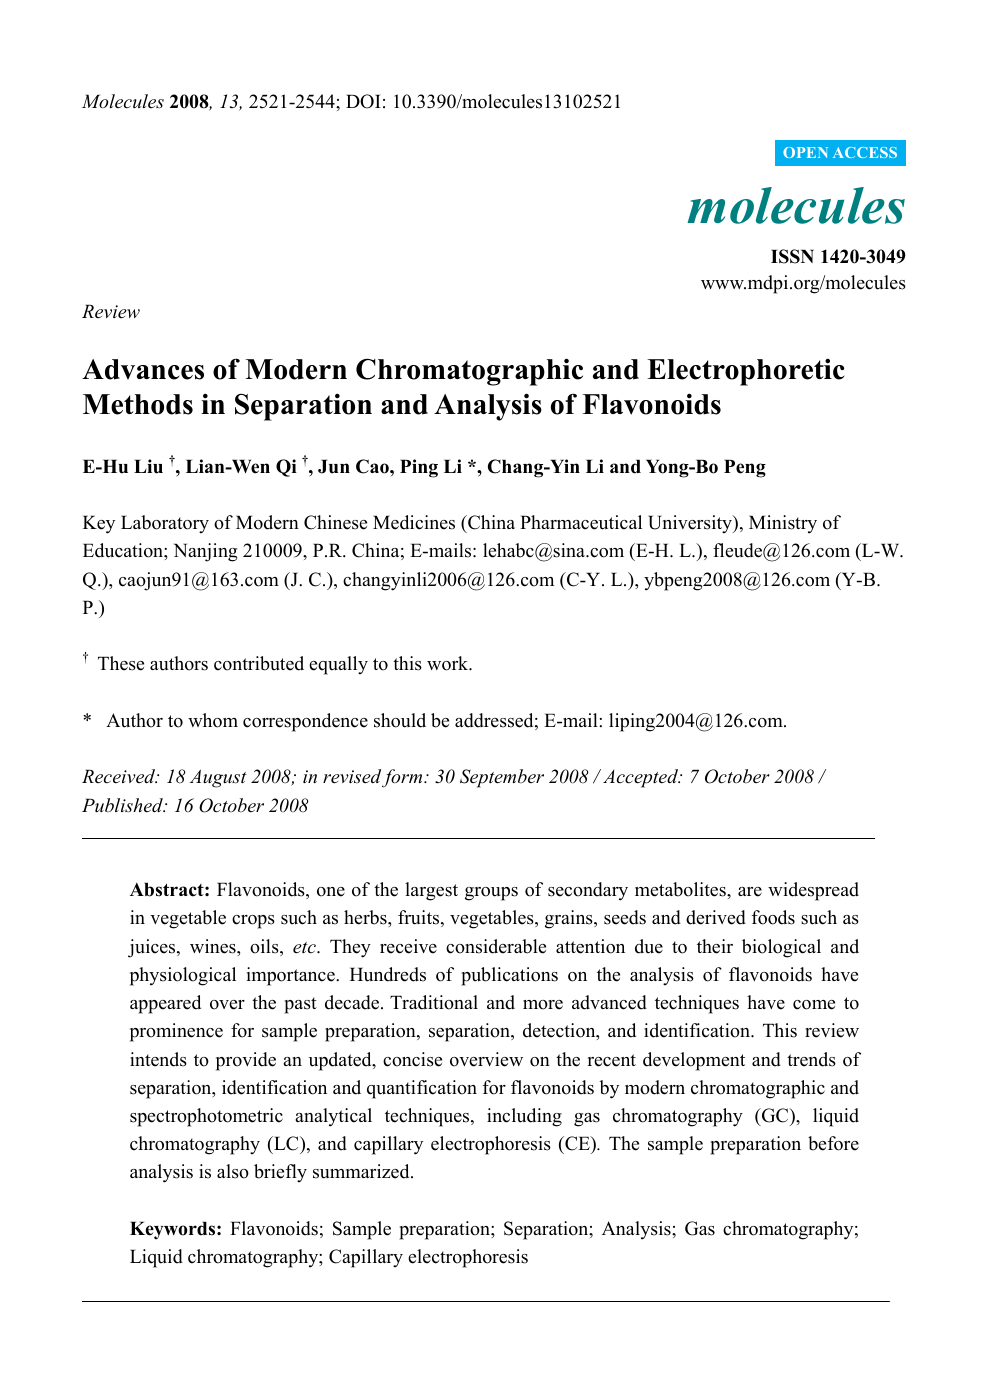 Advances Of Modern Chromatographic And Electrophoretic Methods In Separation And Analysis Of Flavonoids Topic Of Research Paper In Chemical Sciences Download Scholarly Article Pdf And Read For Free On Cyberleninka Open